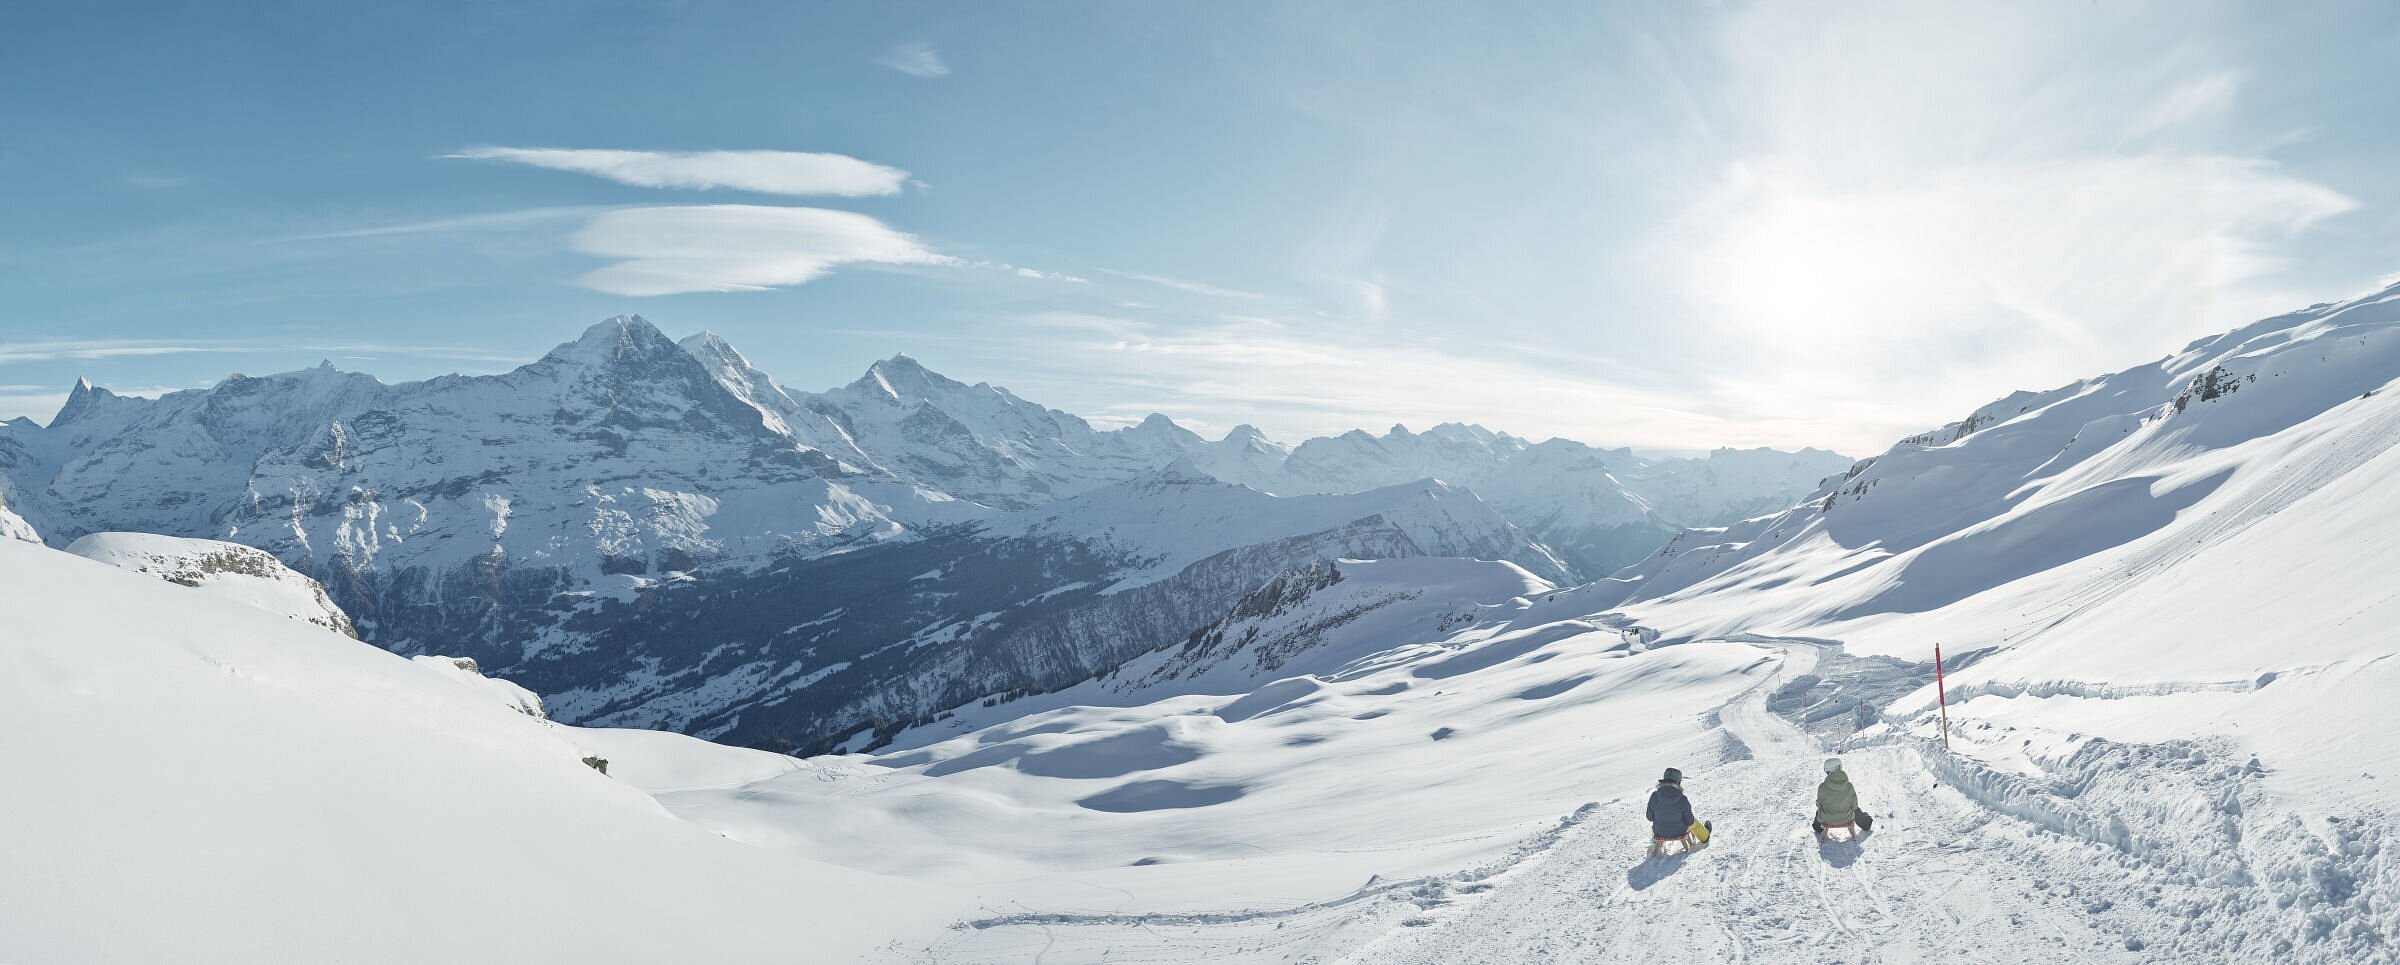 THE 15 BEST Things to Do in Grindelwald - 2022 (with Photos) - Tripadvisor